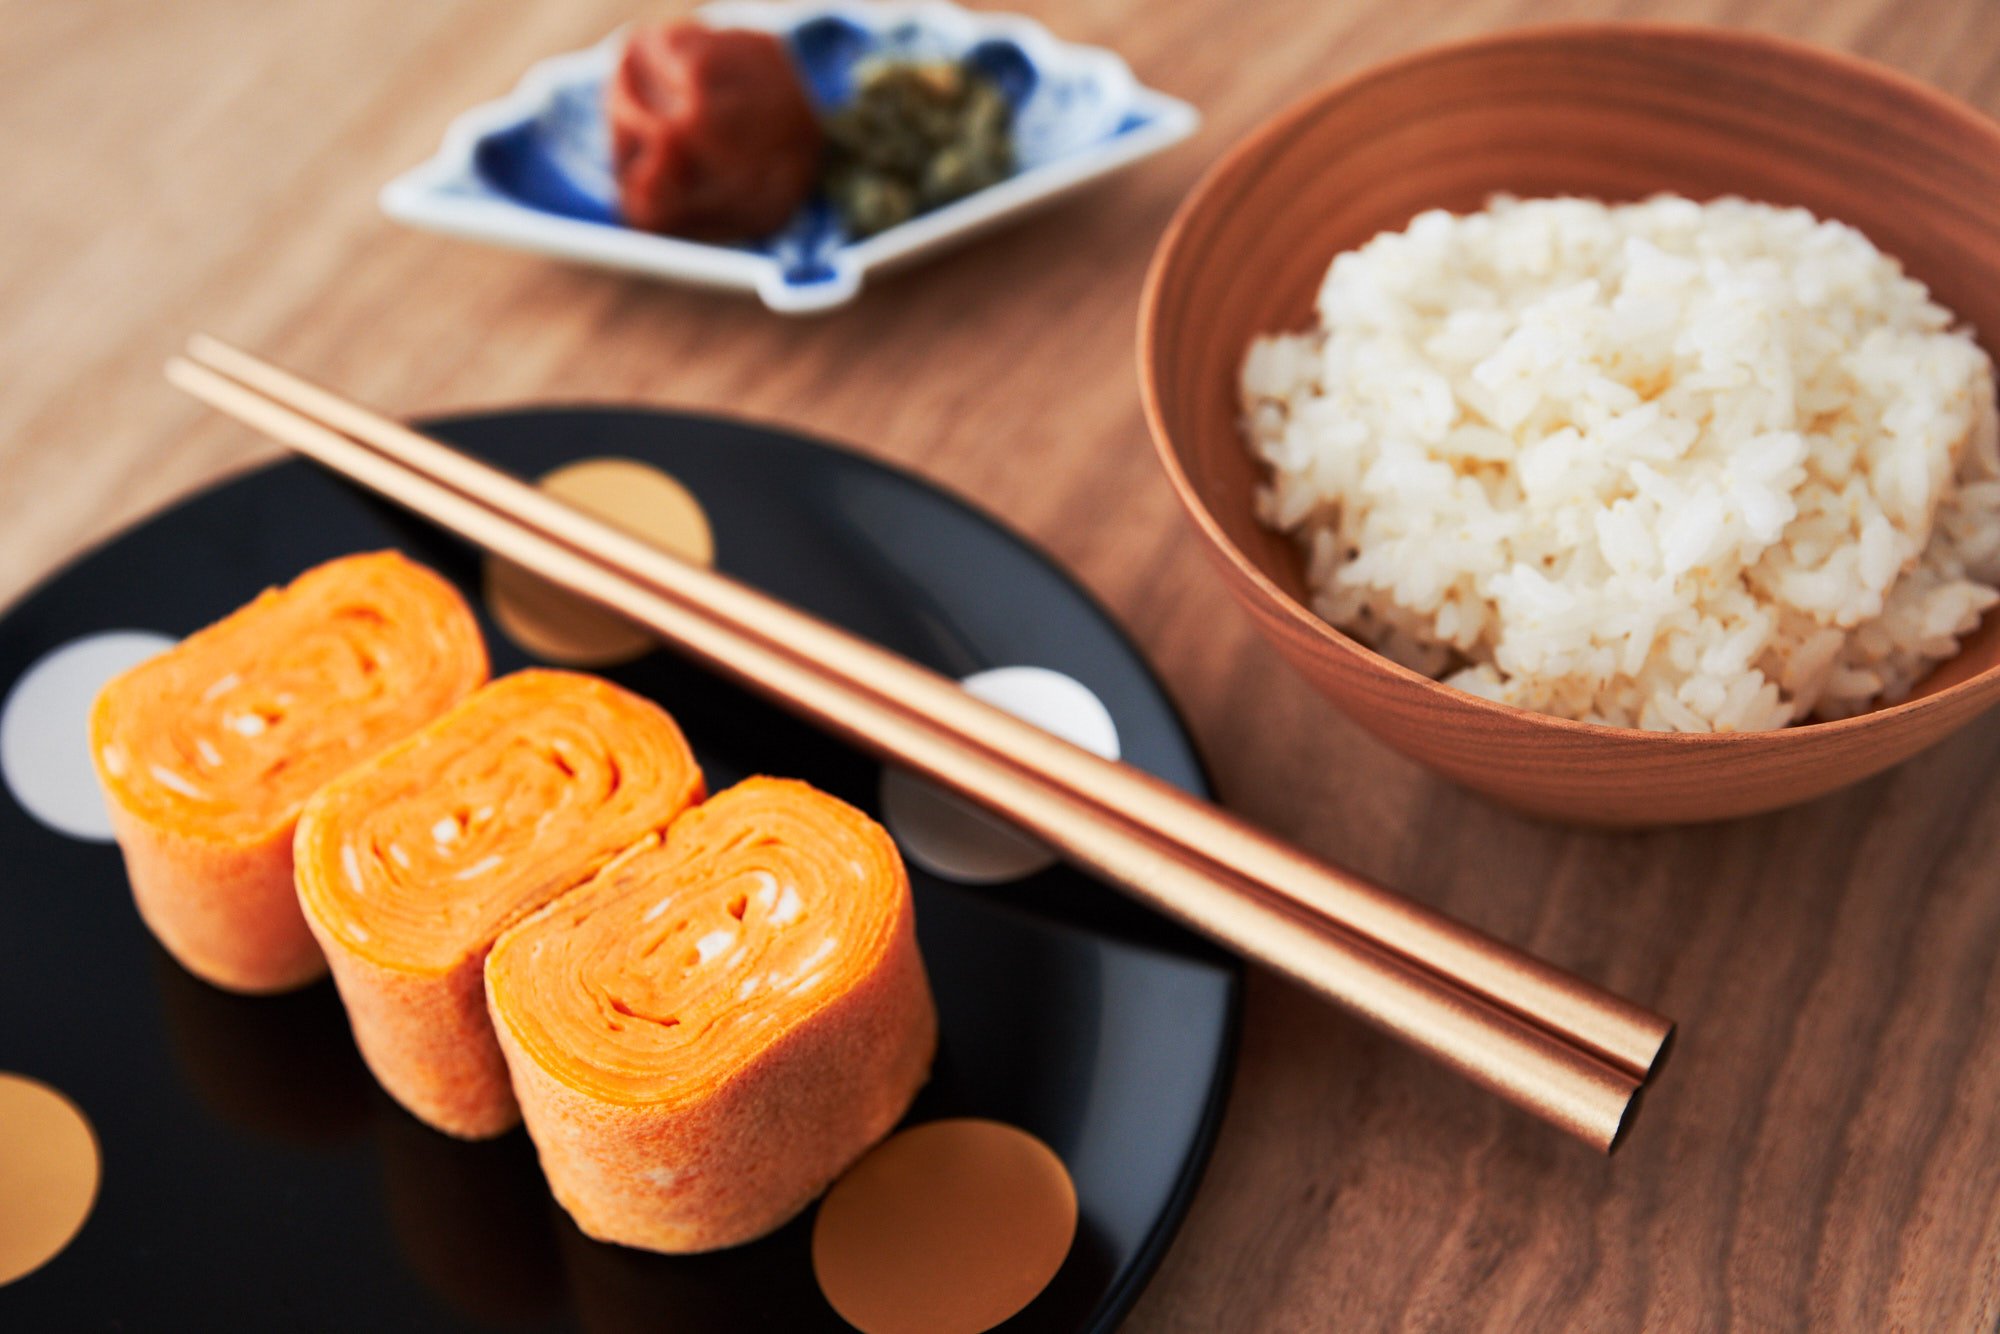 Tamagoyaki is an easy delicious Japanese omelette made by rolling thin layers of seasoned egg into a log. This savory Tamagoyaki recipe is perfect for adding to a bento box lunch.